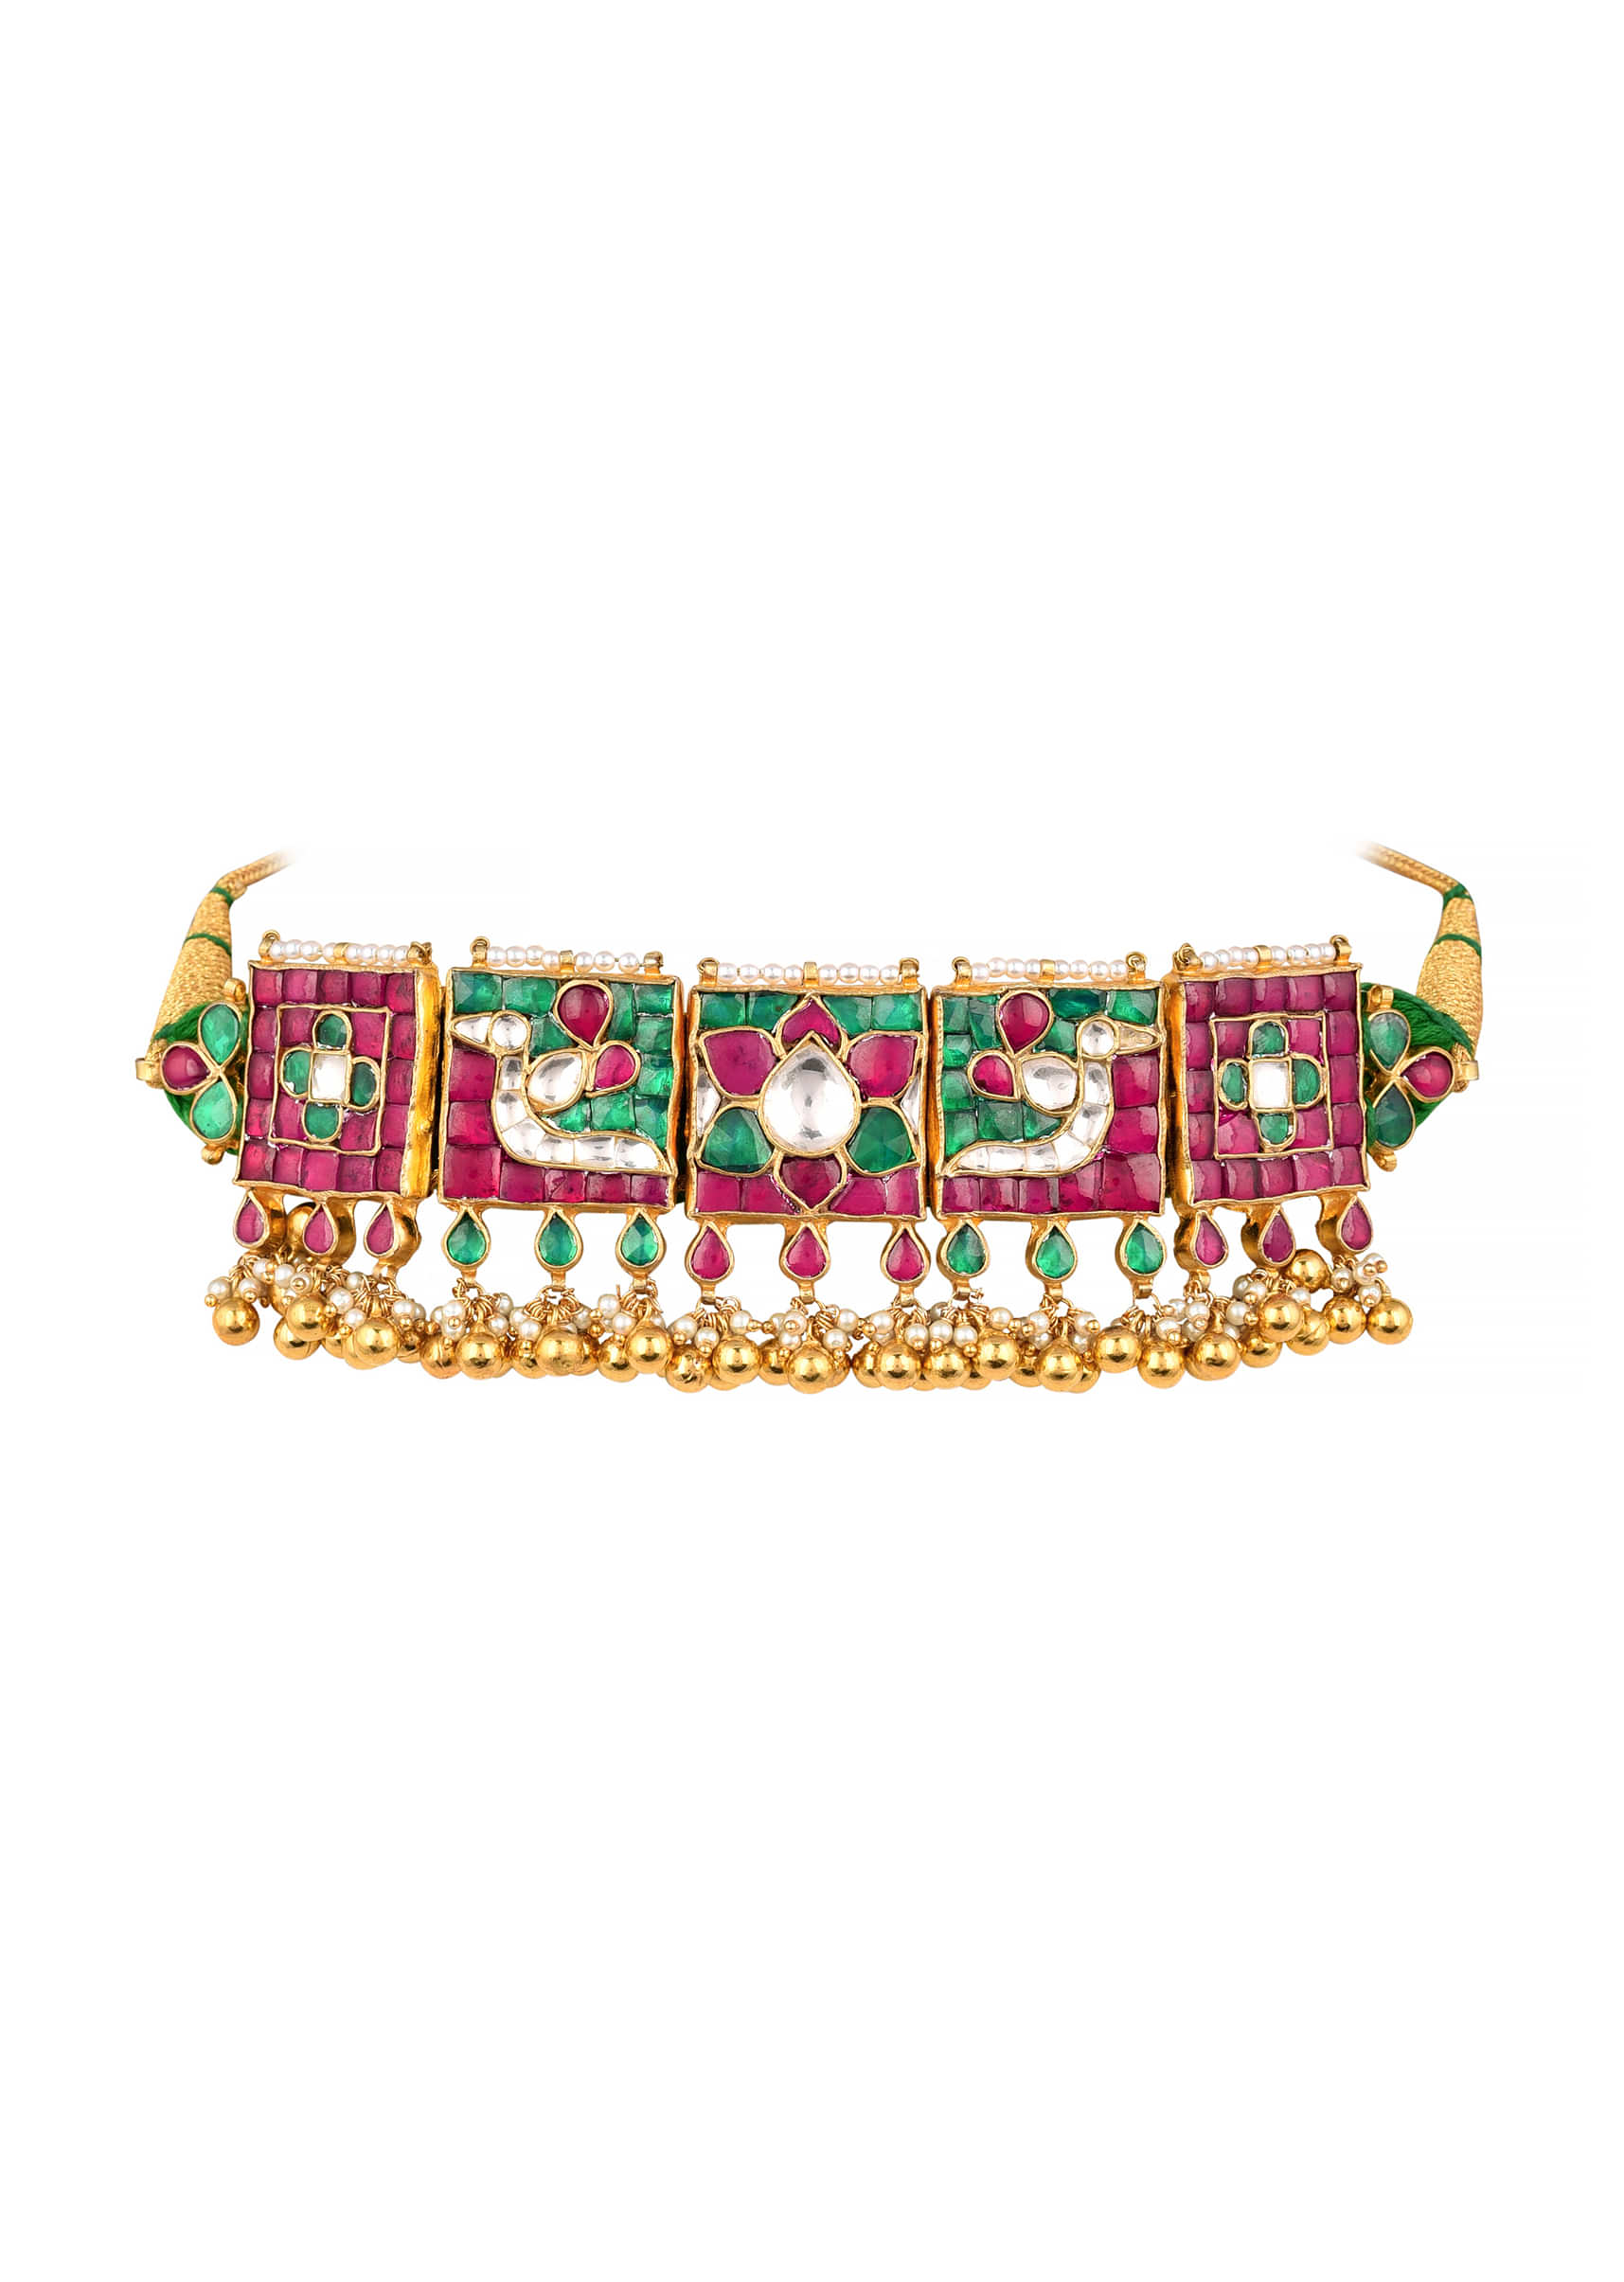 Gold Finish Kundan Choker Set With Beads, Pearls, And Synthetic Red-Green Stones